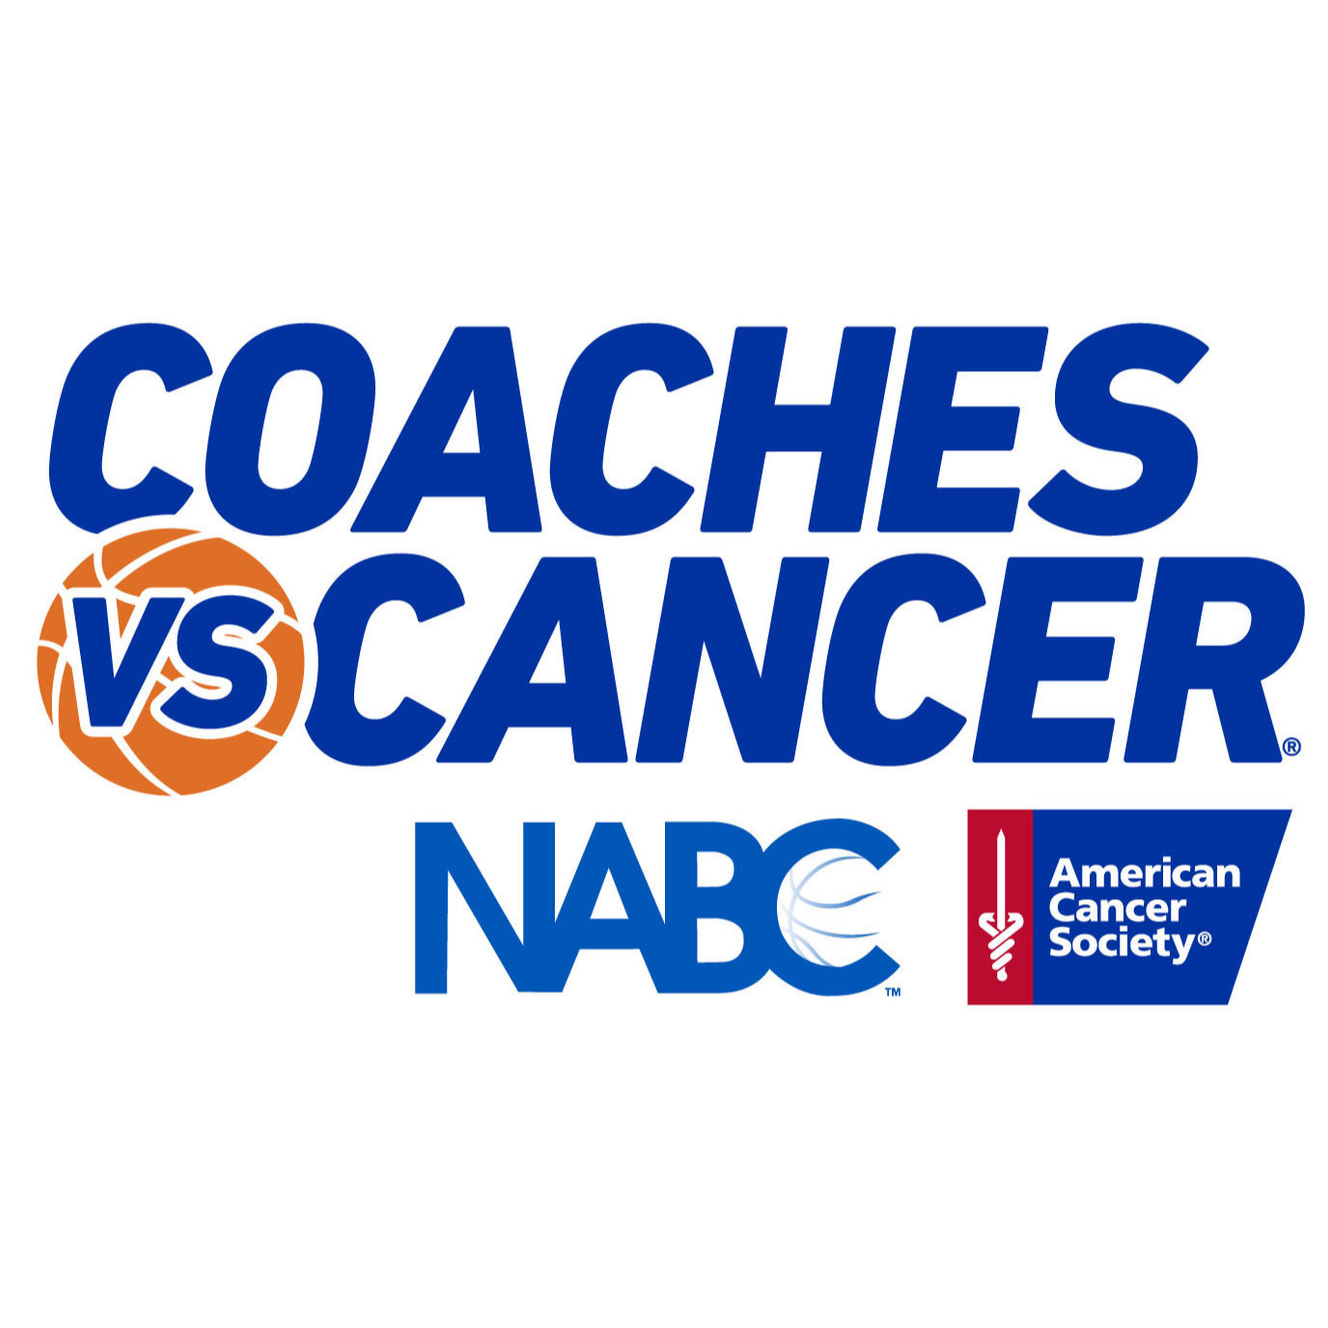 Cover image for  article: Coaches vs. Cancer: A Media Initiative to Help Fight Cancer